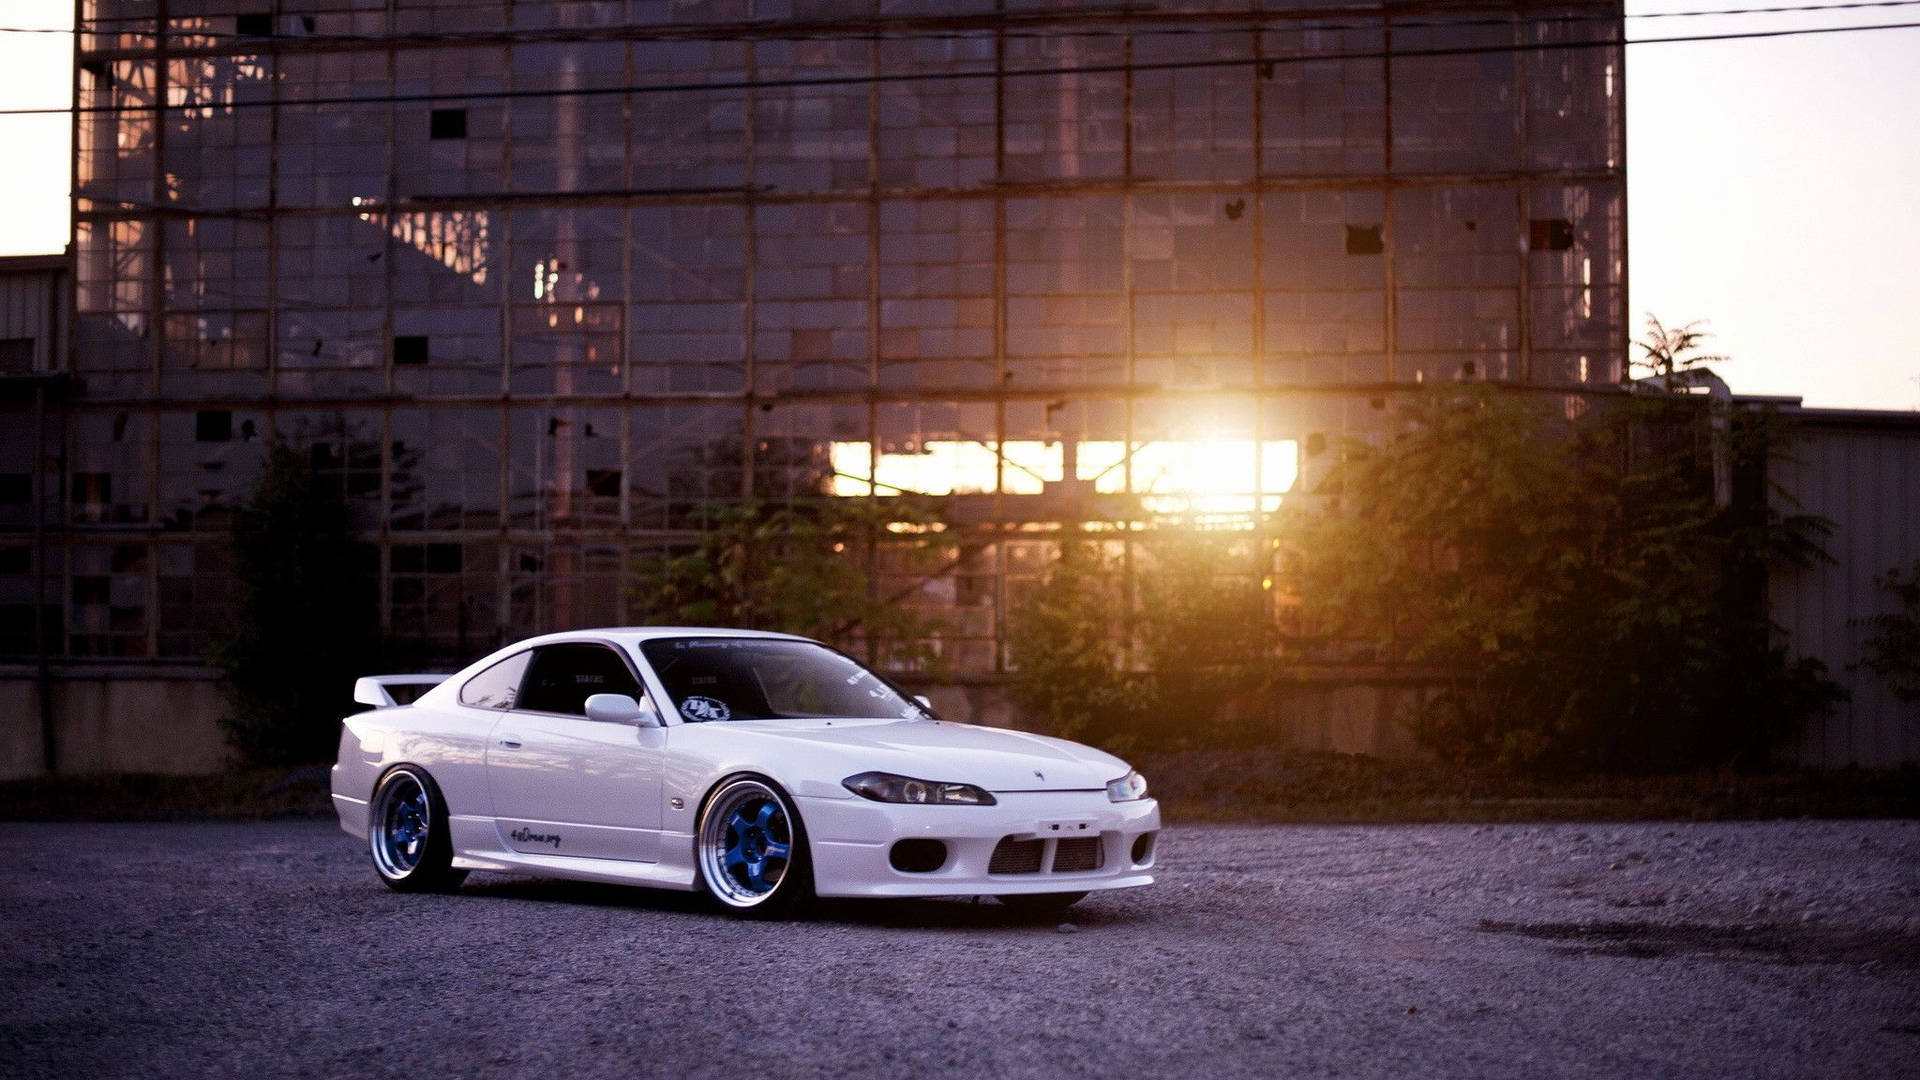 4k Jdm Nissan Silvia In Construction Site